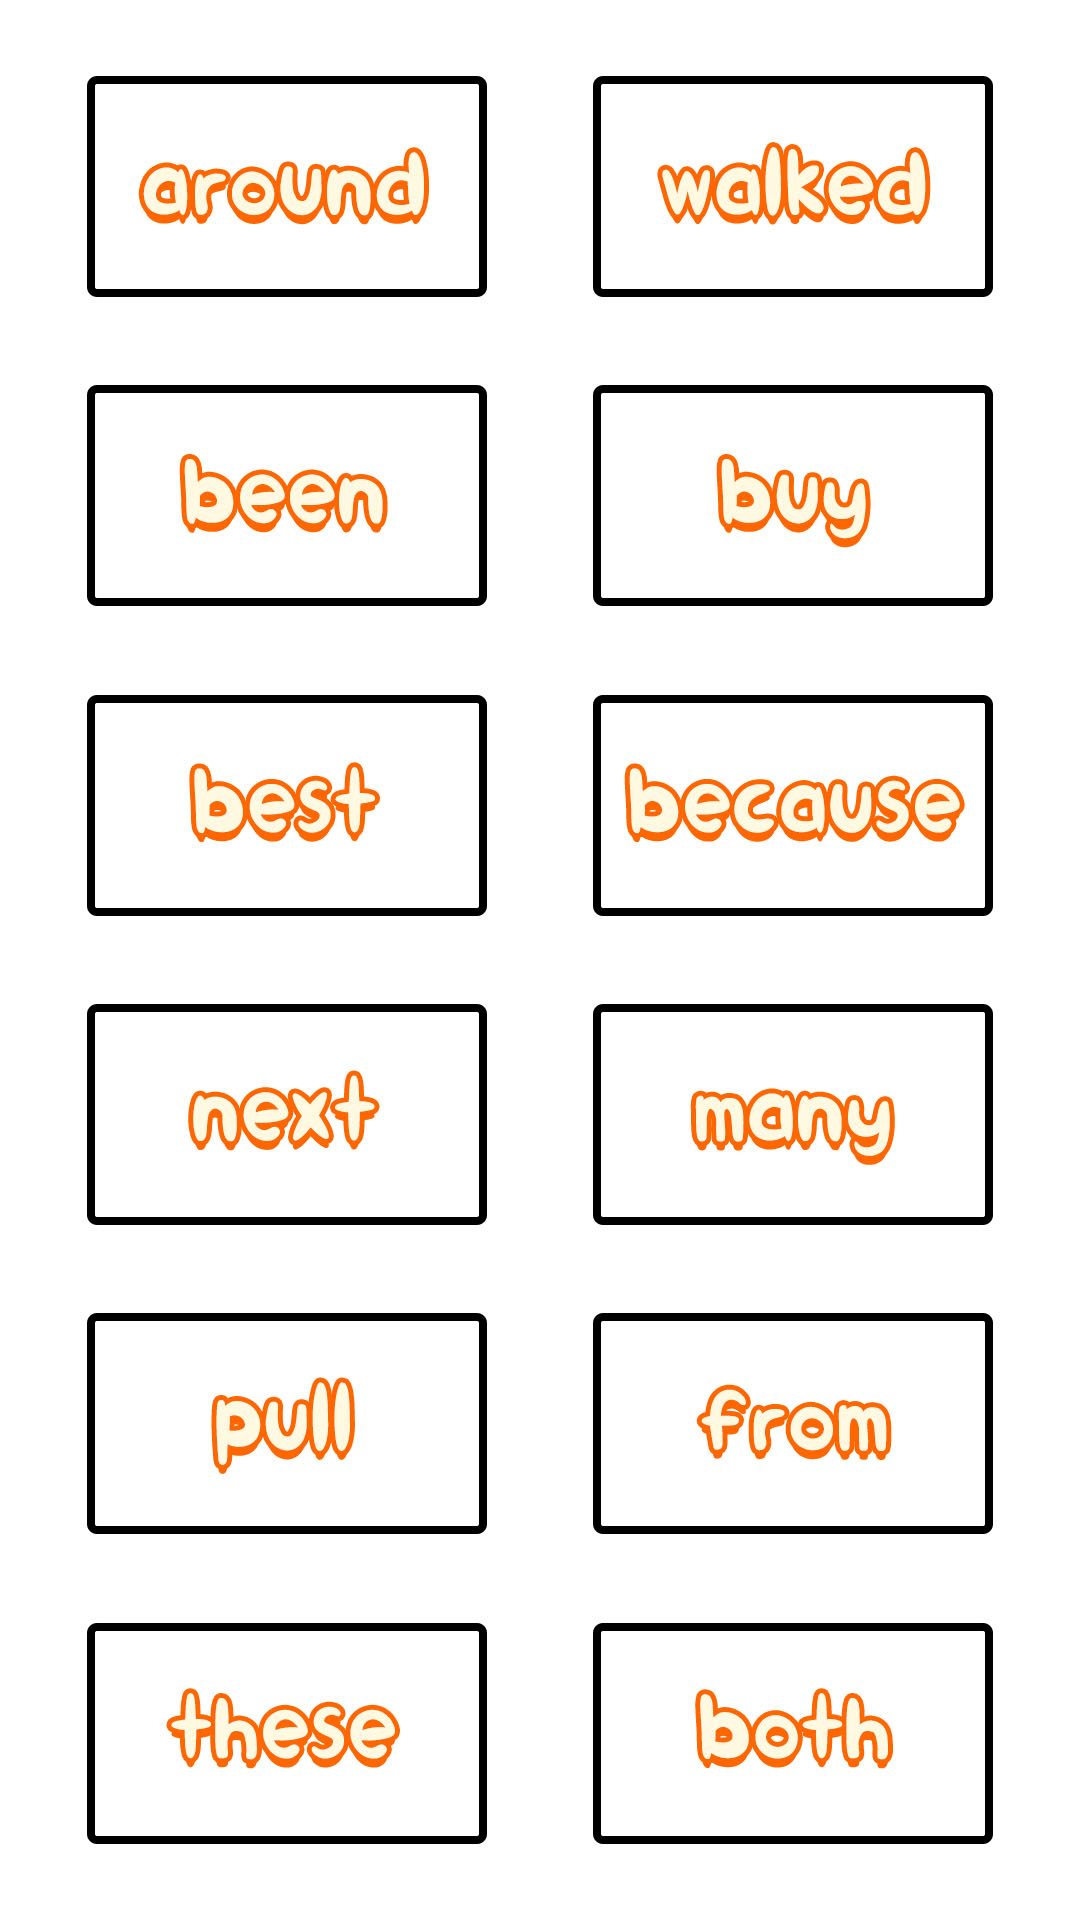 2nd Grade Sight Words Flash Cards